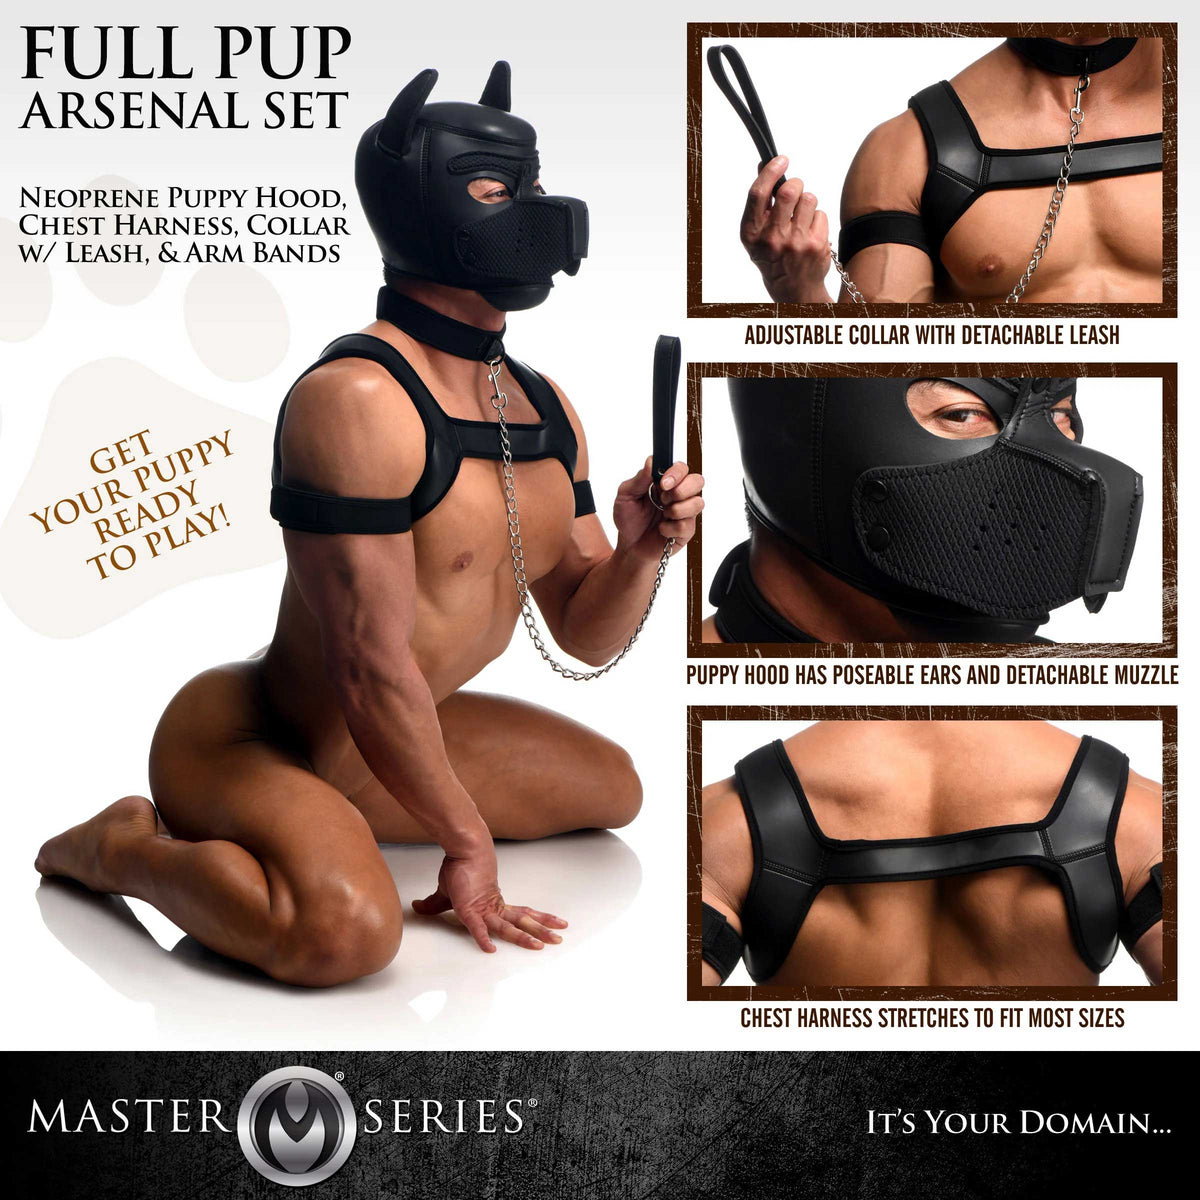 full pup arsenal set neoprene puppy hood chest harness collar with leash and arm band black